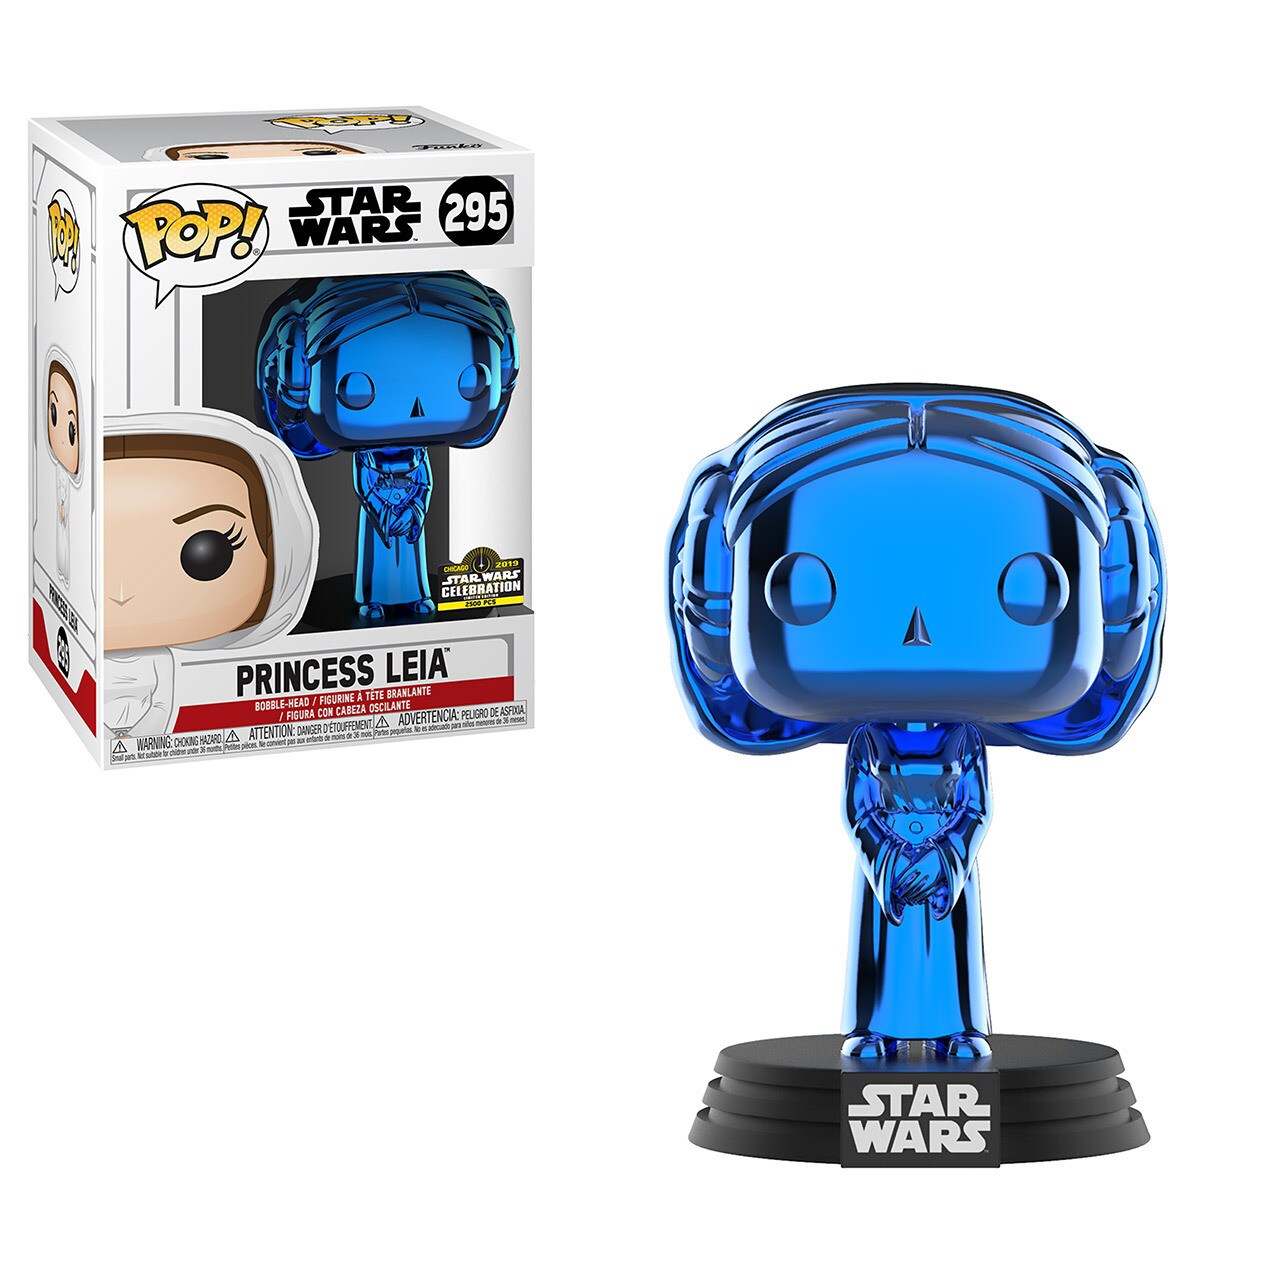 A Funko Pop! available only at Star Wars Celebration Chicago.